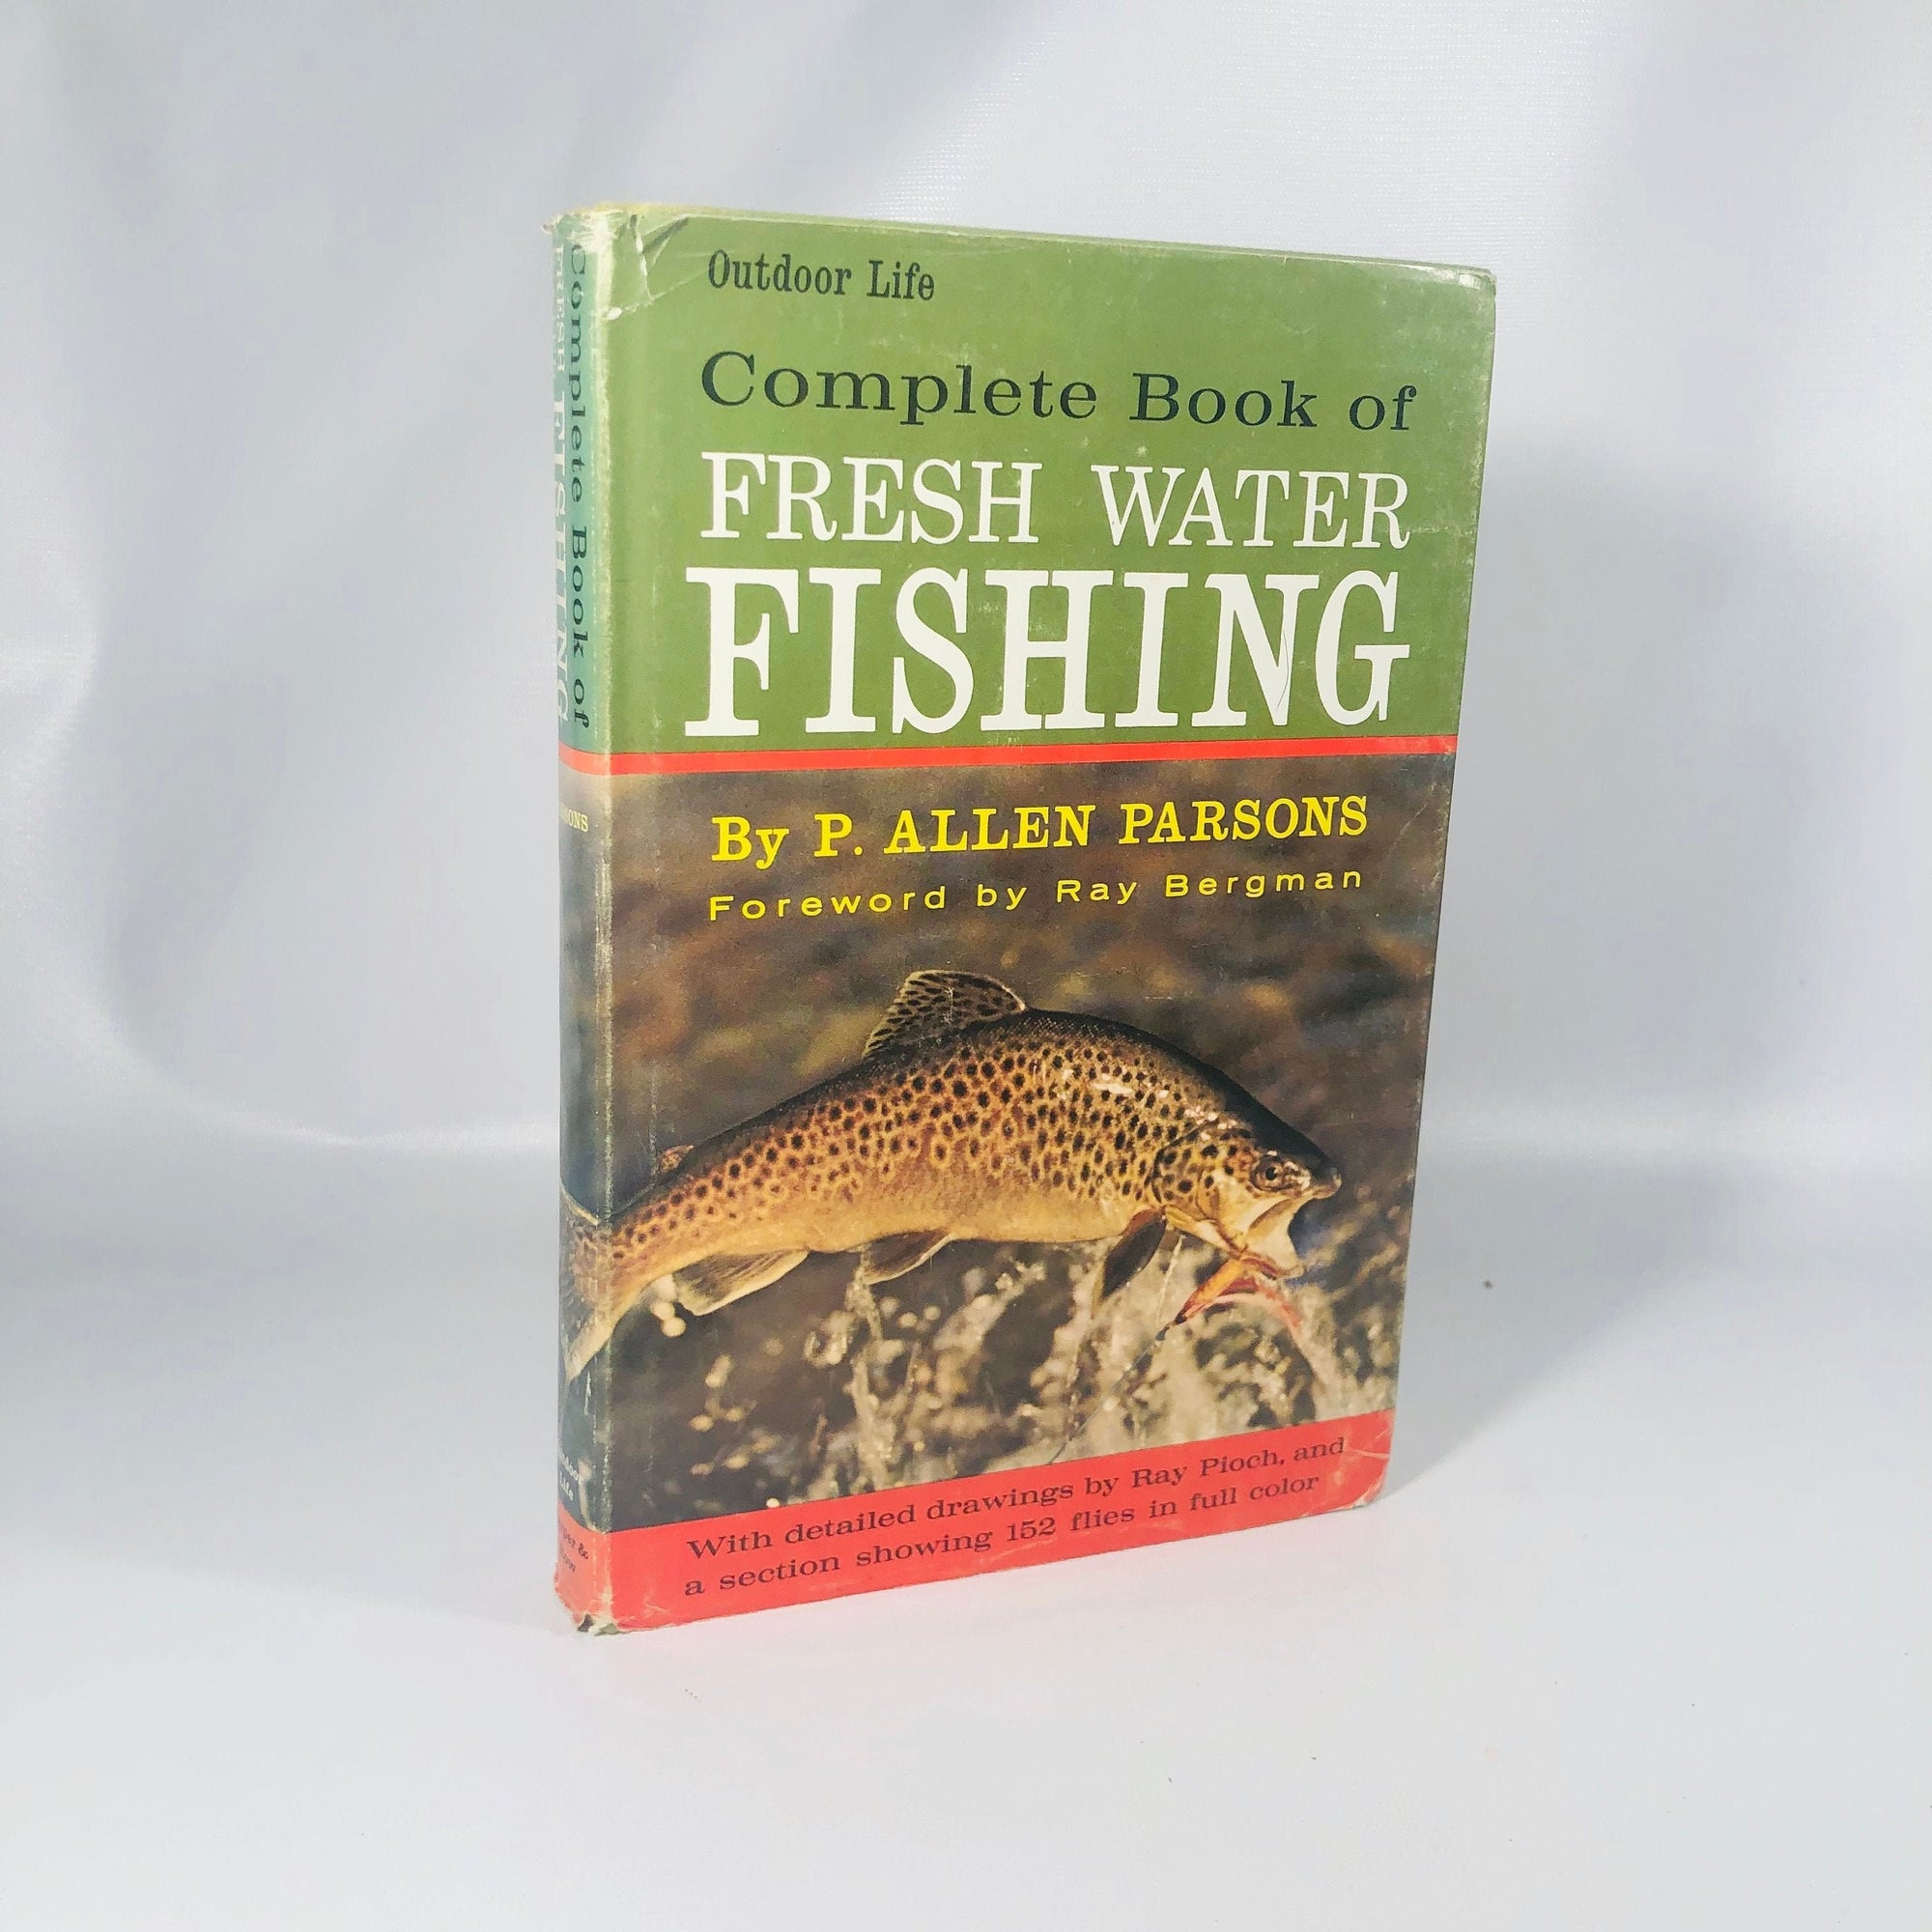 Complete Book of Fresh Water Fishing Outdoor Life by P. Allen Parsons 1963 A Vintage Fishing Book Vintage Book